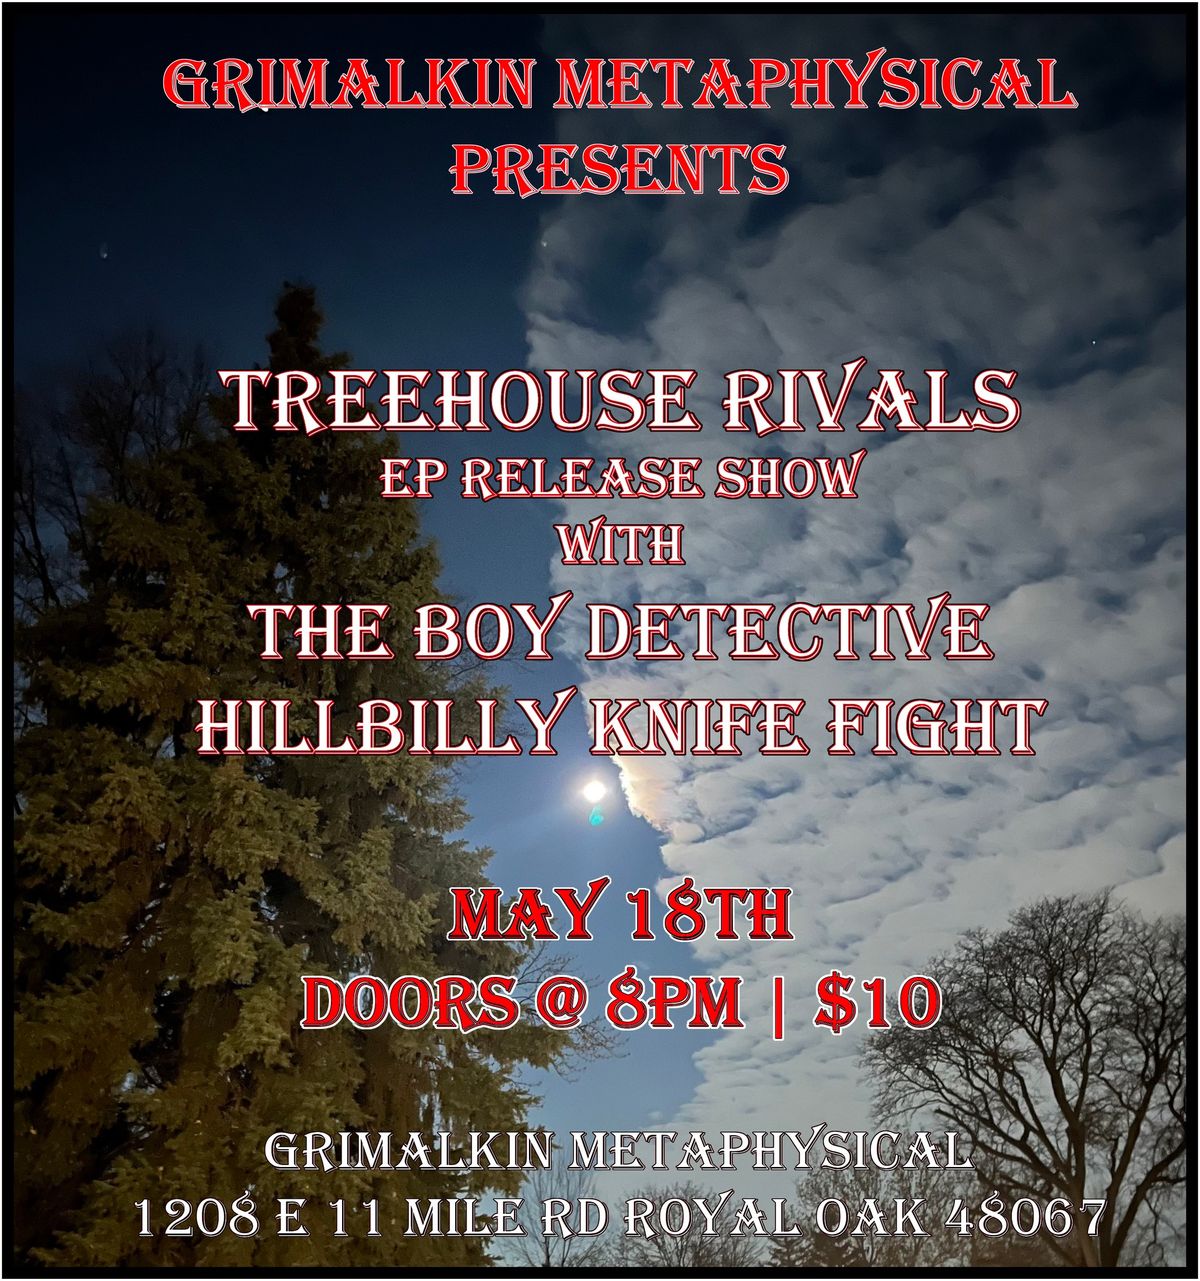 Treehouse Rivals EP release show